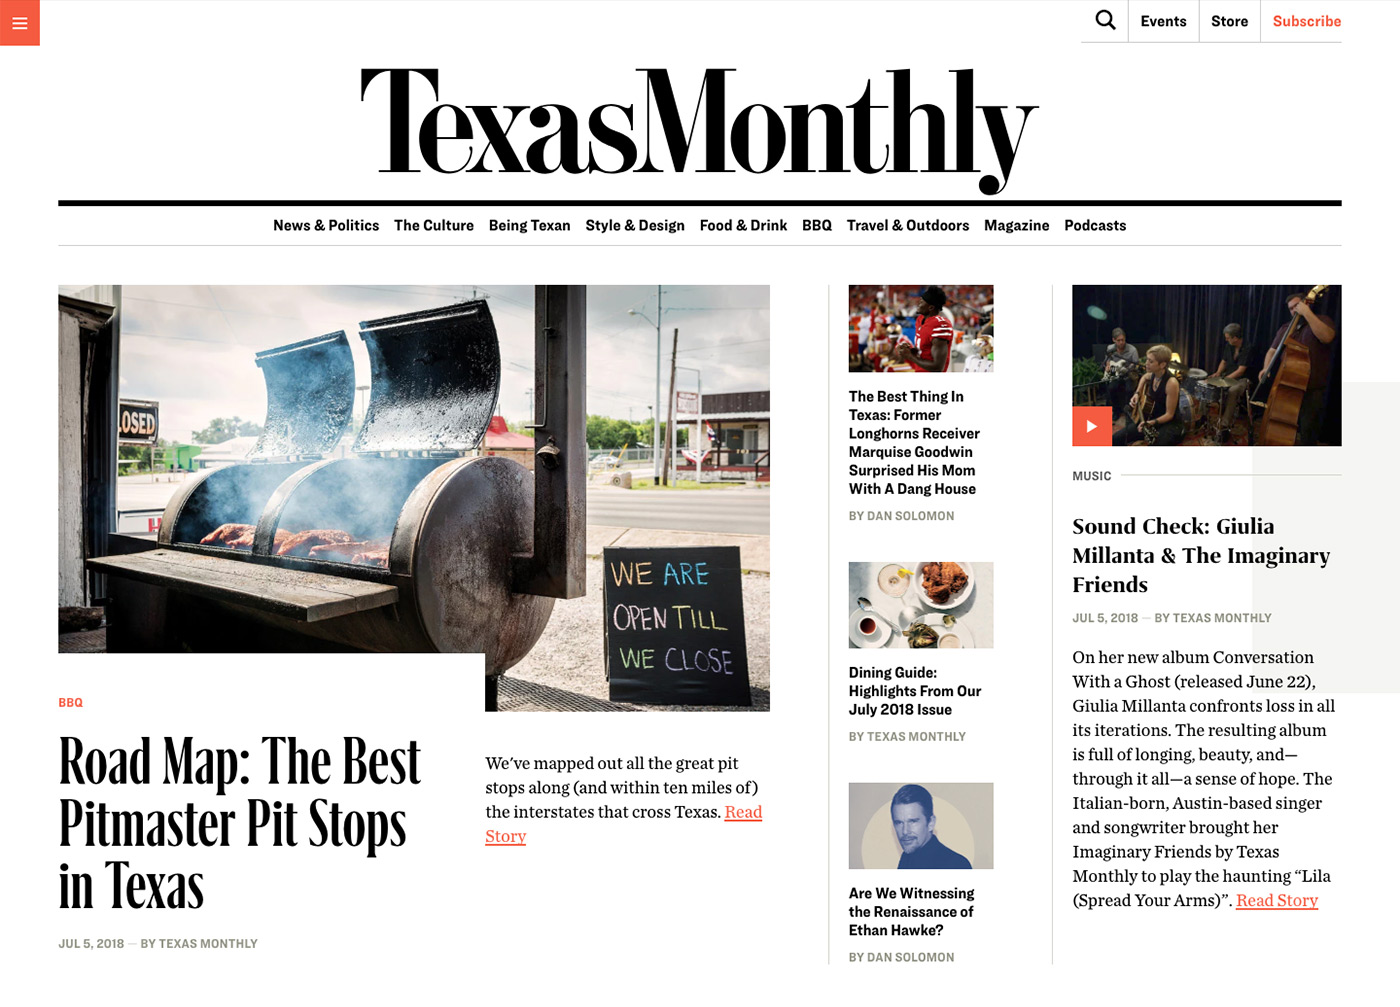 Texas Monthly home page